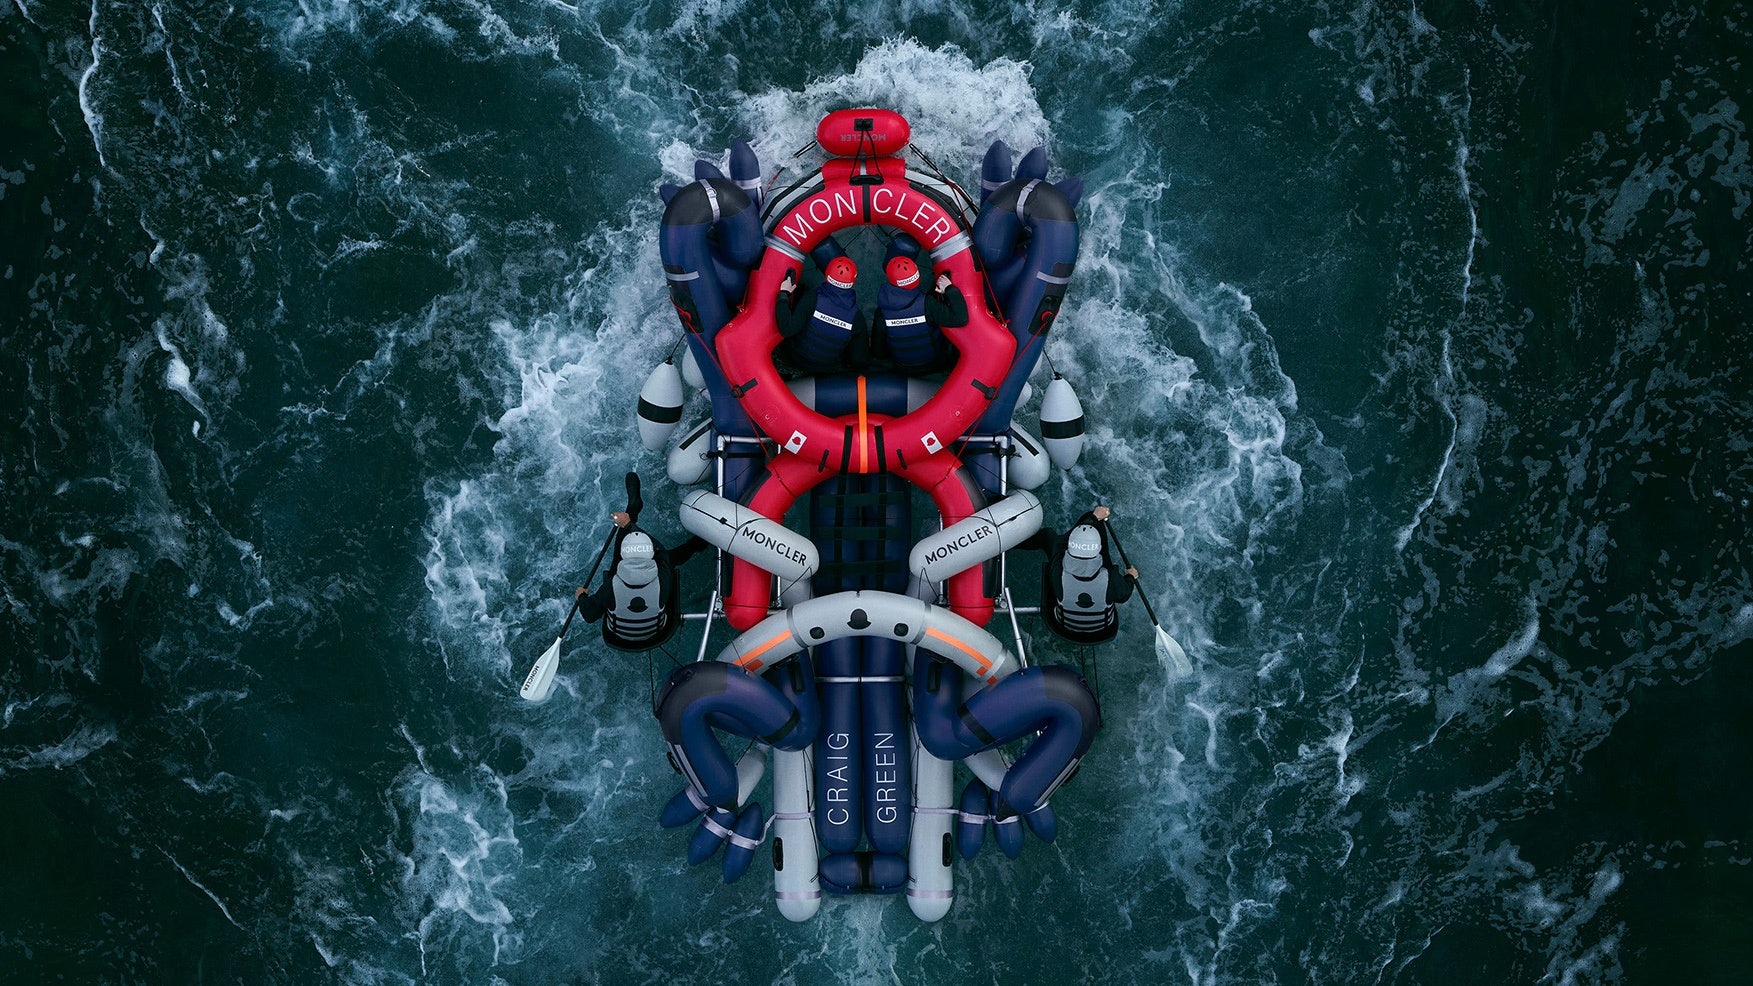 Although Moncler posted strong Q1 results, with revenues rising 21 percent, CEO Remo Ruffini says there’s still much work to be done. Photo: Courtesy of Moncler